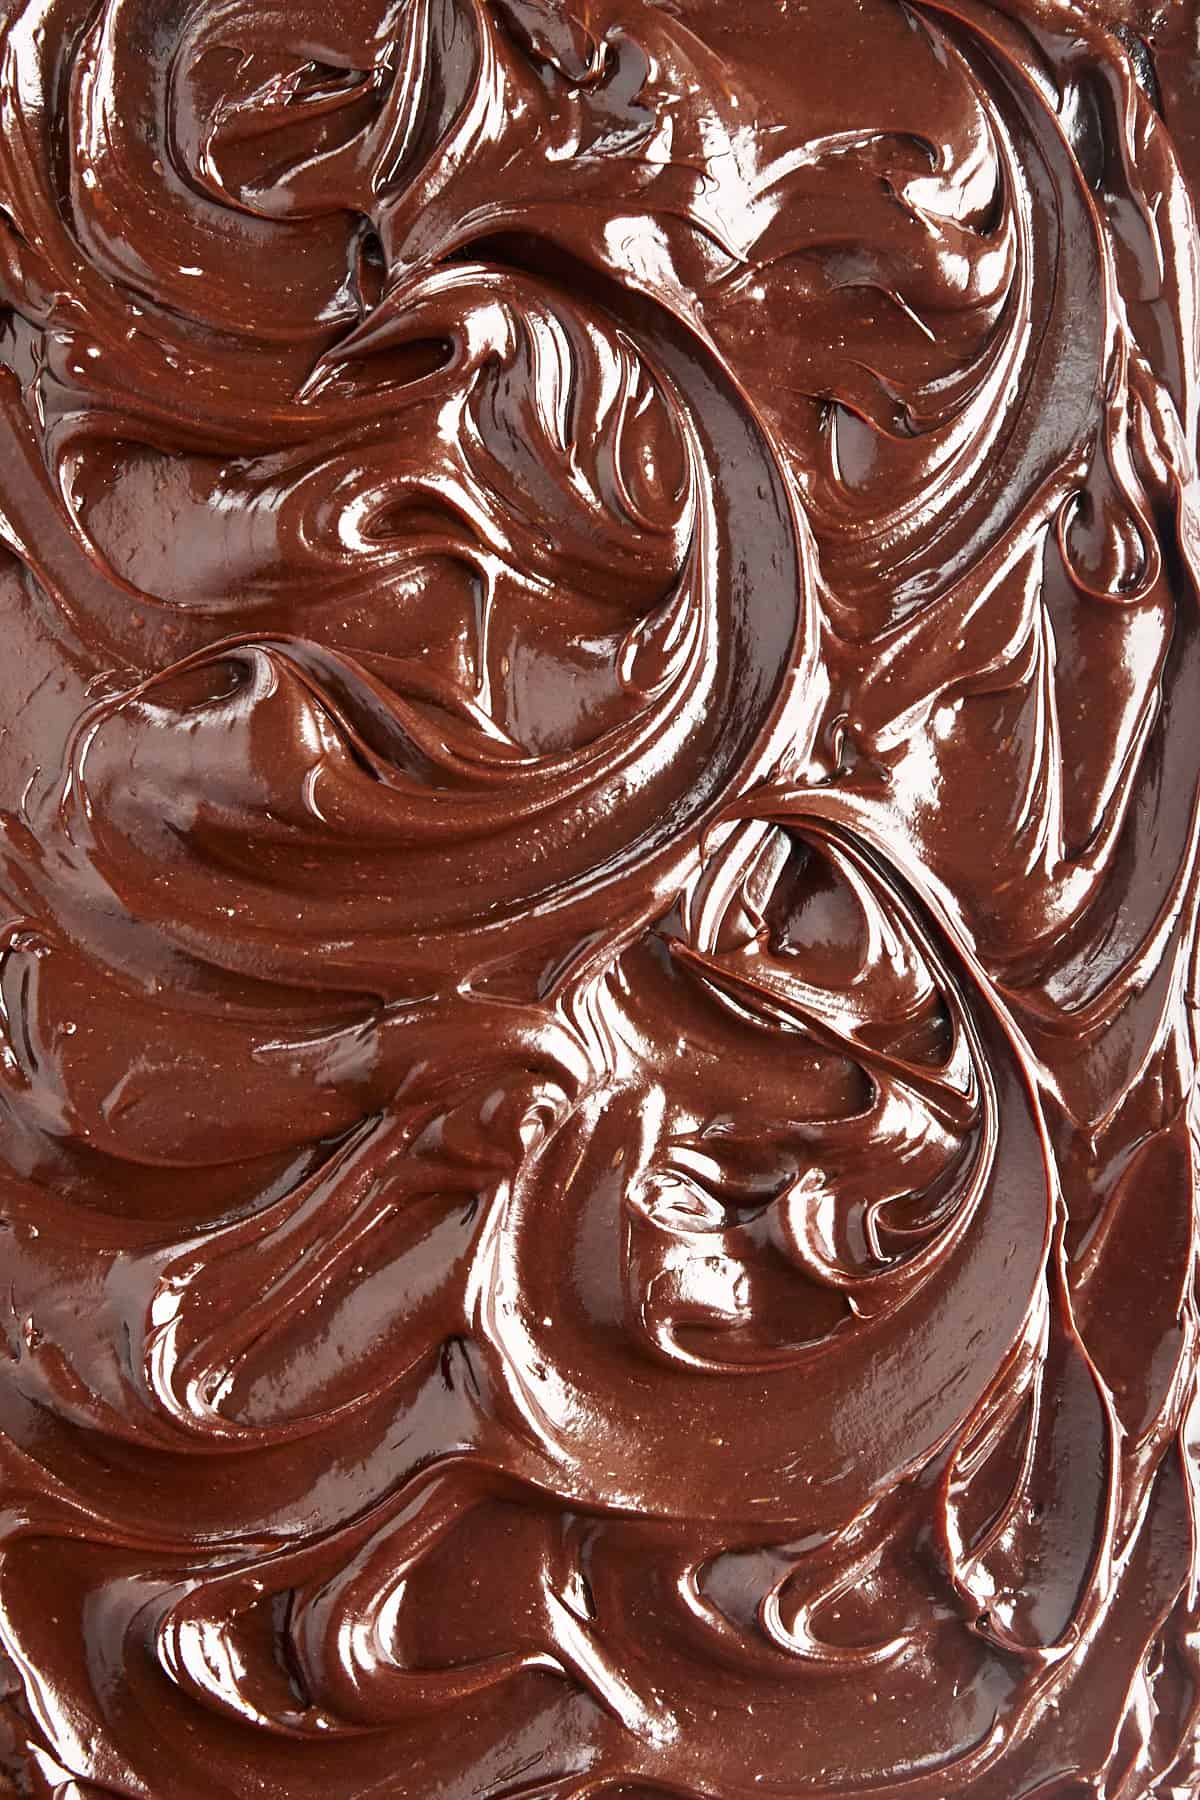 Homemade chocolate frosting. 